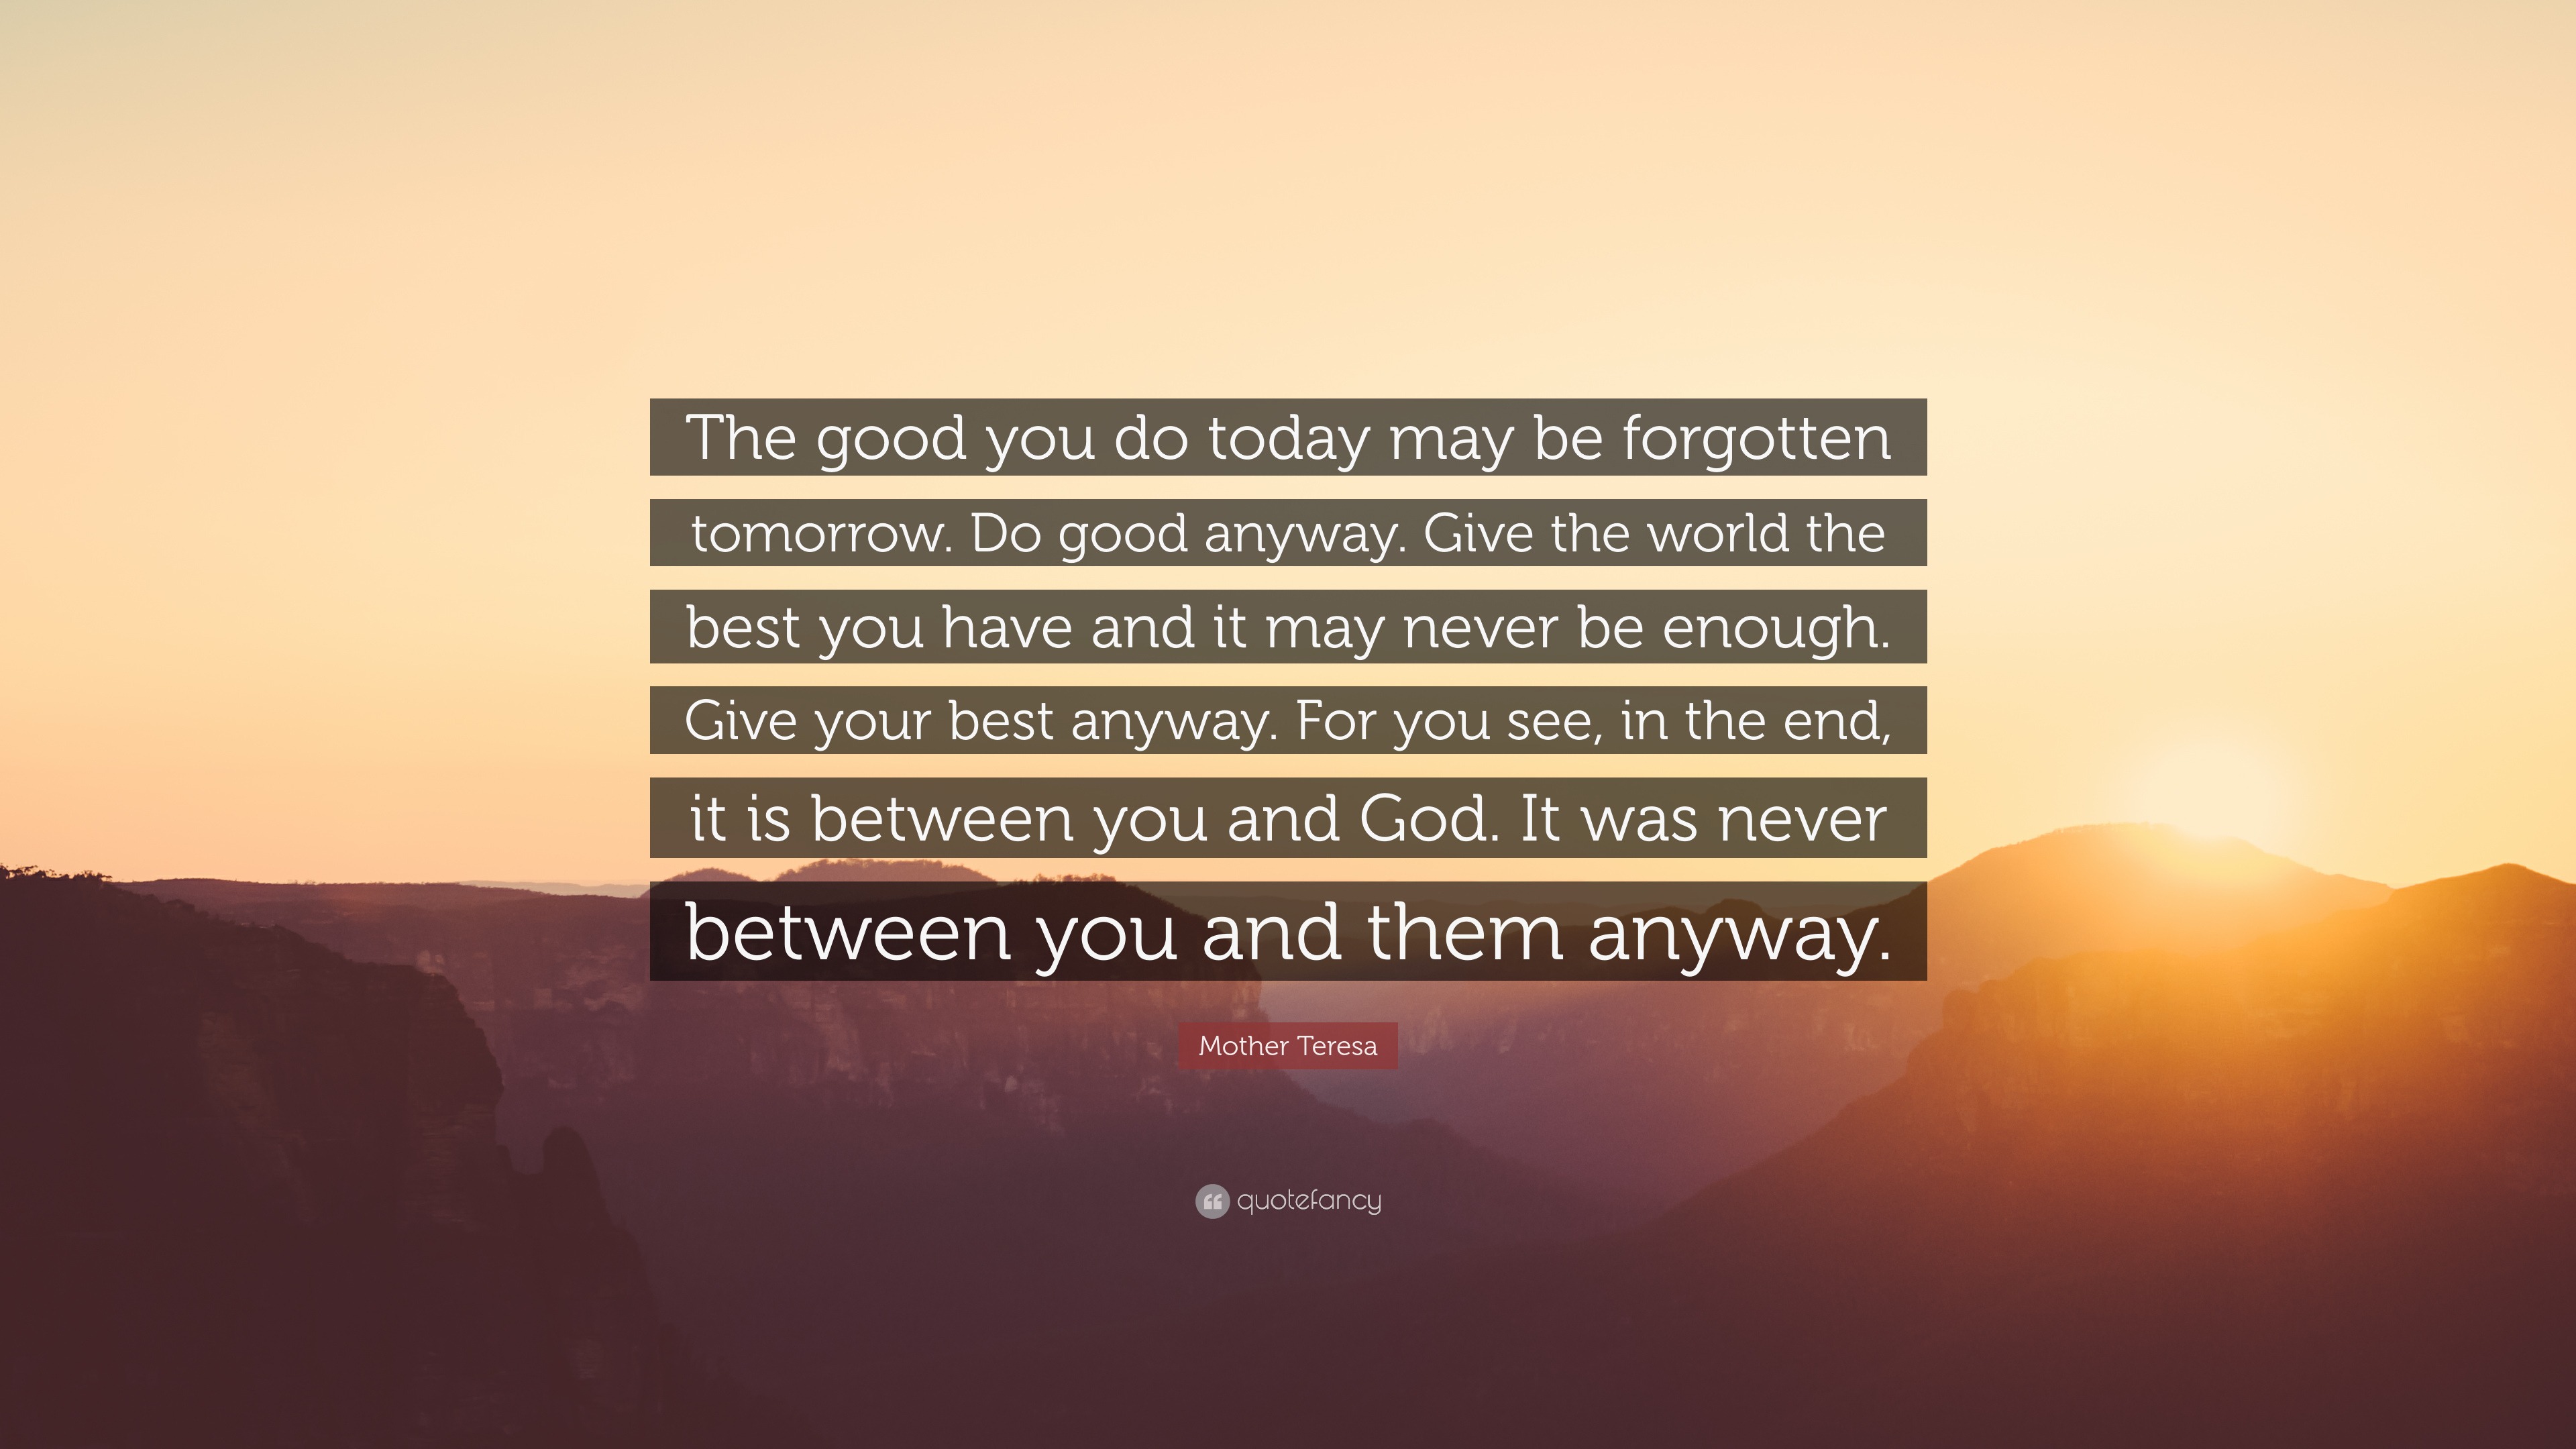 Mother Teresa Quote “The good you do today may be forgotten tomorrow Do